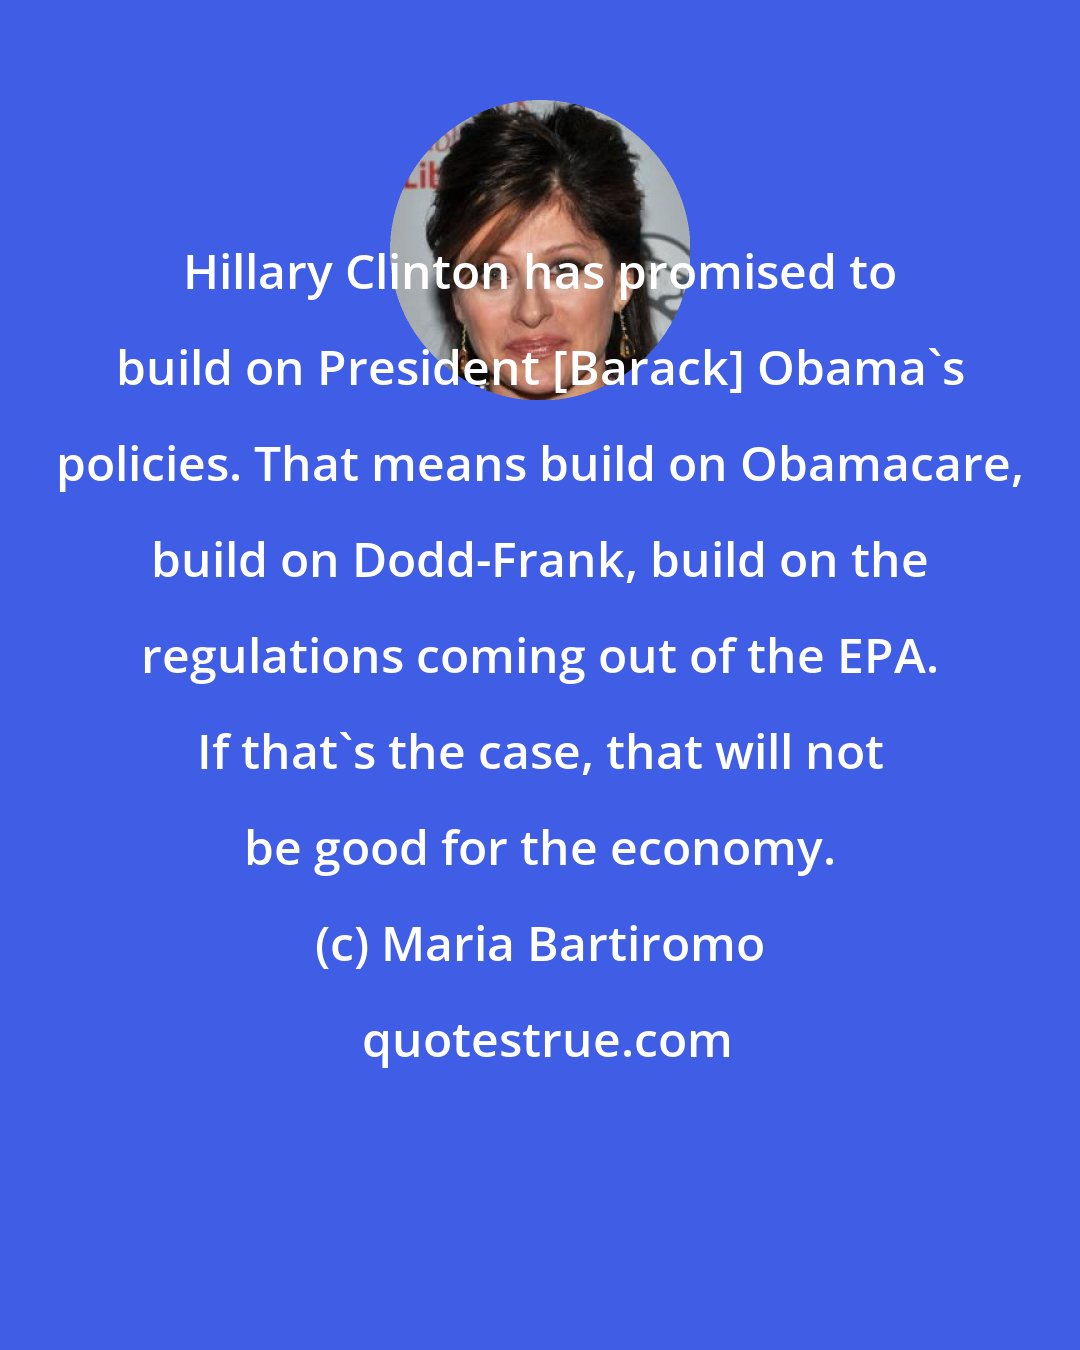 Maria Bartiromo: Hillary Clinton has promised to build on President [Barack] Obama's policies. That means build on Obamacare, build on Dodd-Frank, build on the regulations coming out of the EPA. If that's the case, that will not be good for the economy.